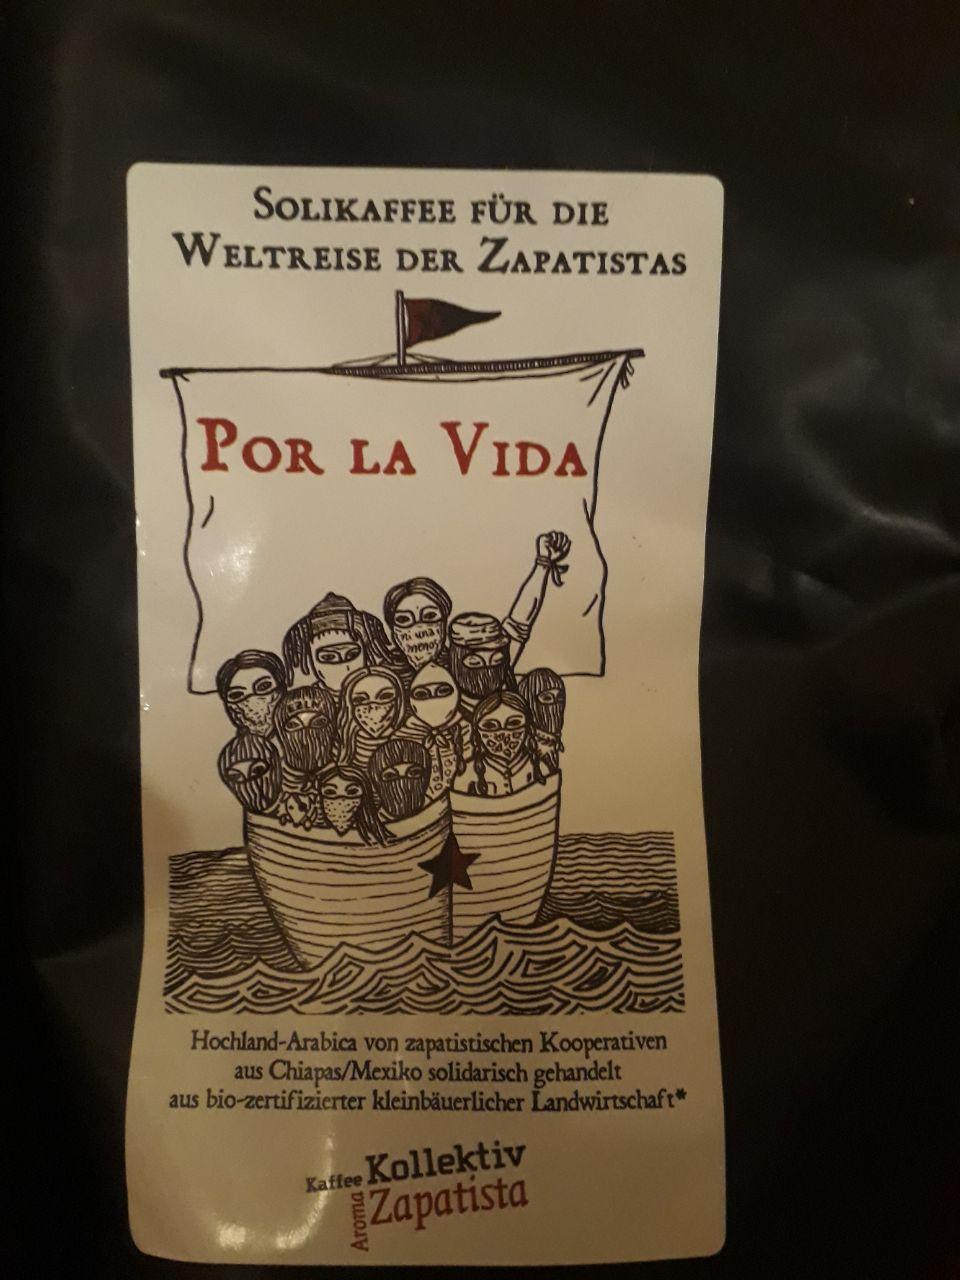 Soli-Merchandise for zapatistas’ journey – you still looking for presents?